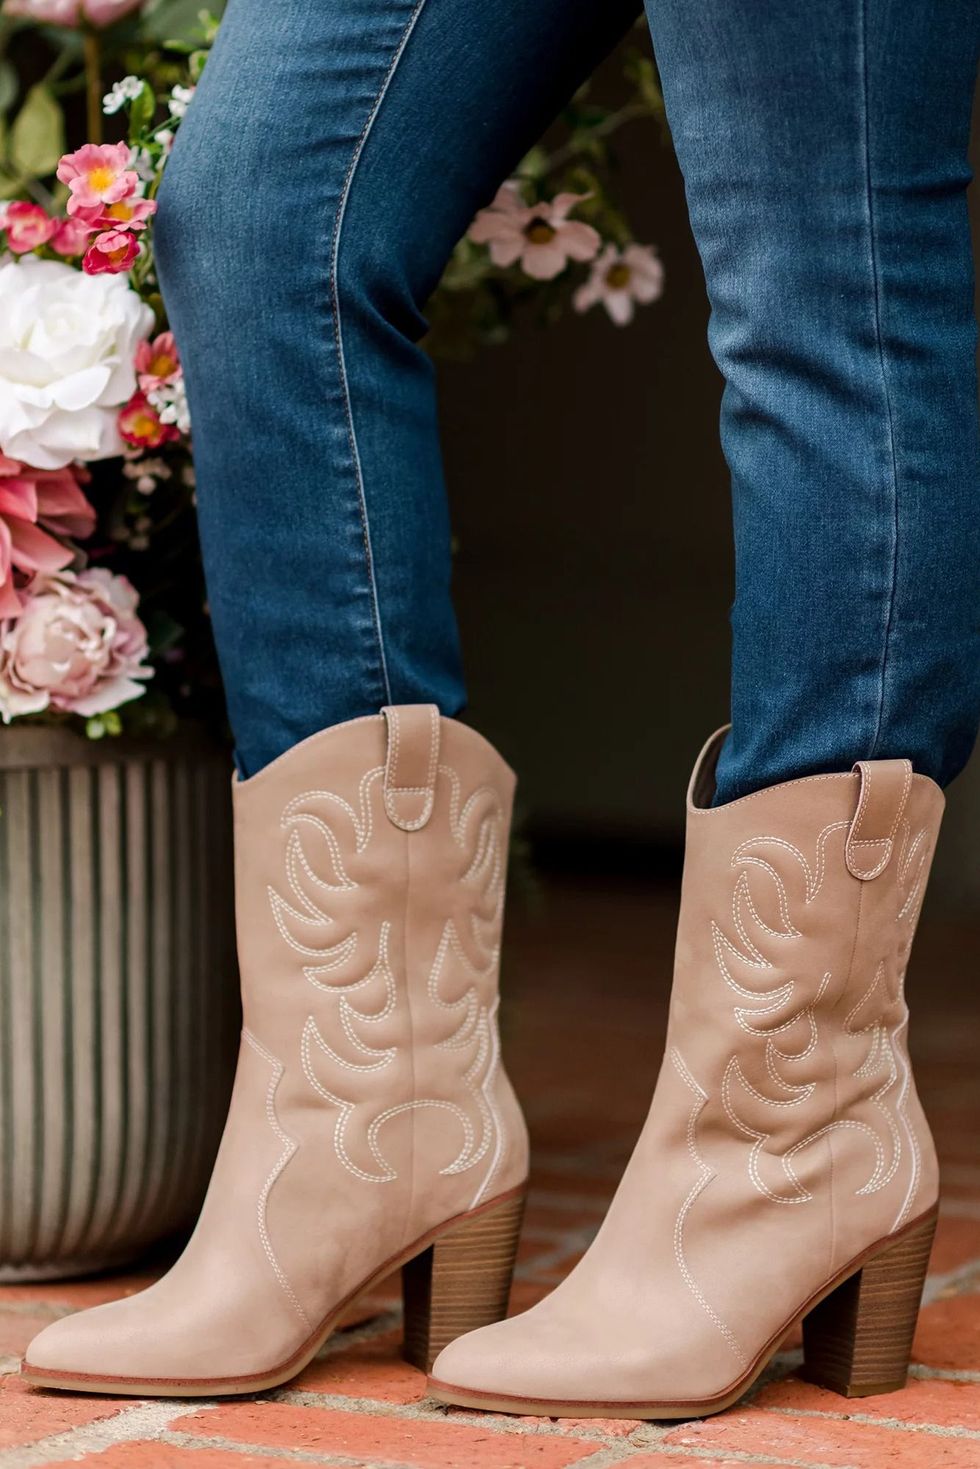 The Pioneer Woman Embroidered Mid-Calf Cowboy Boot